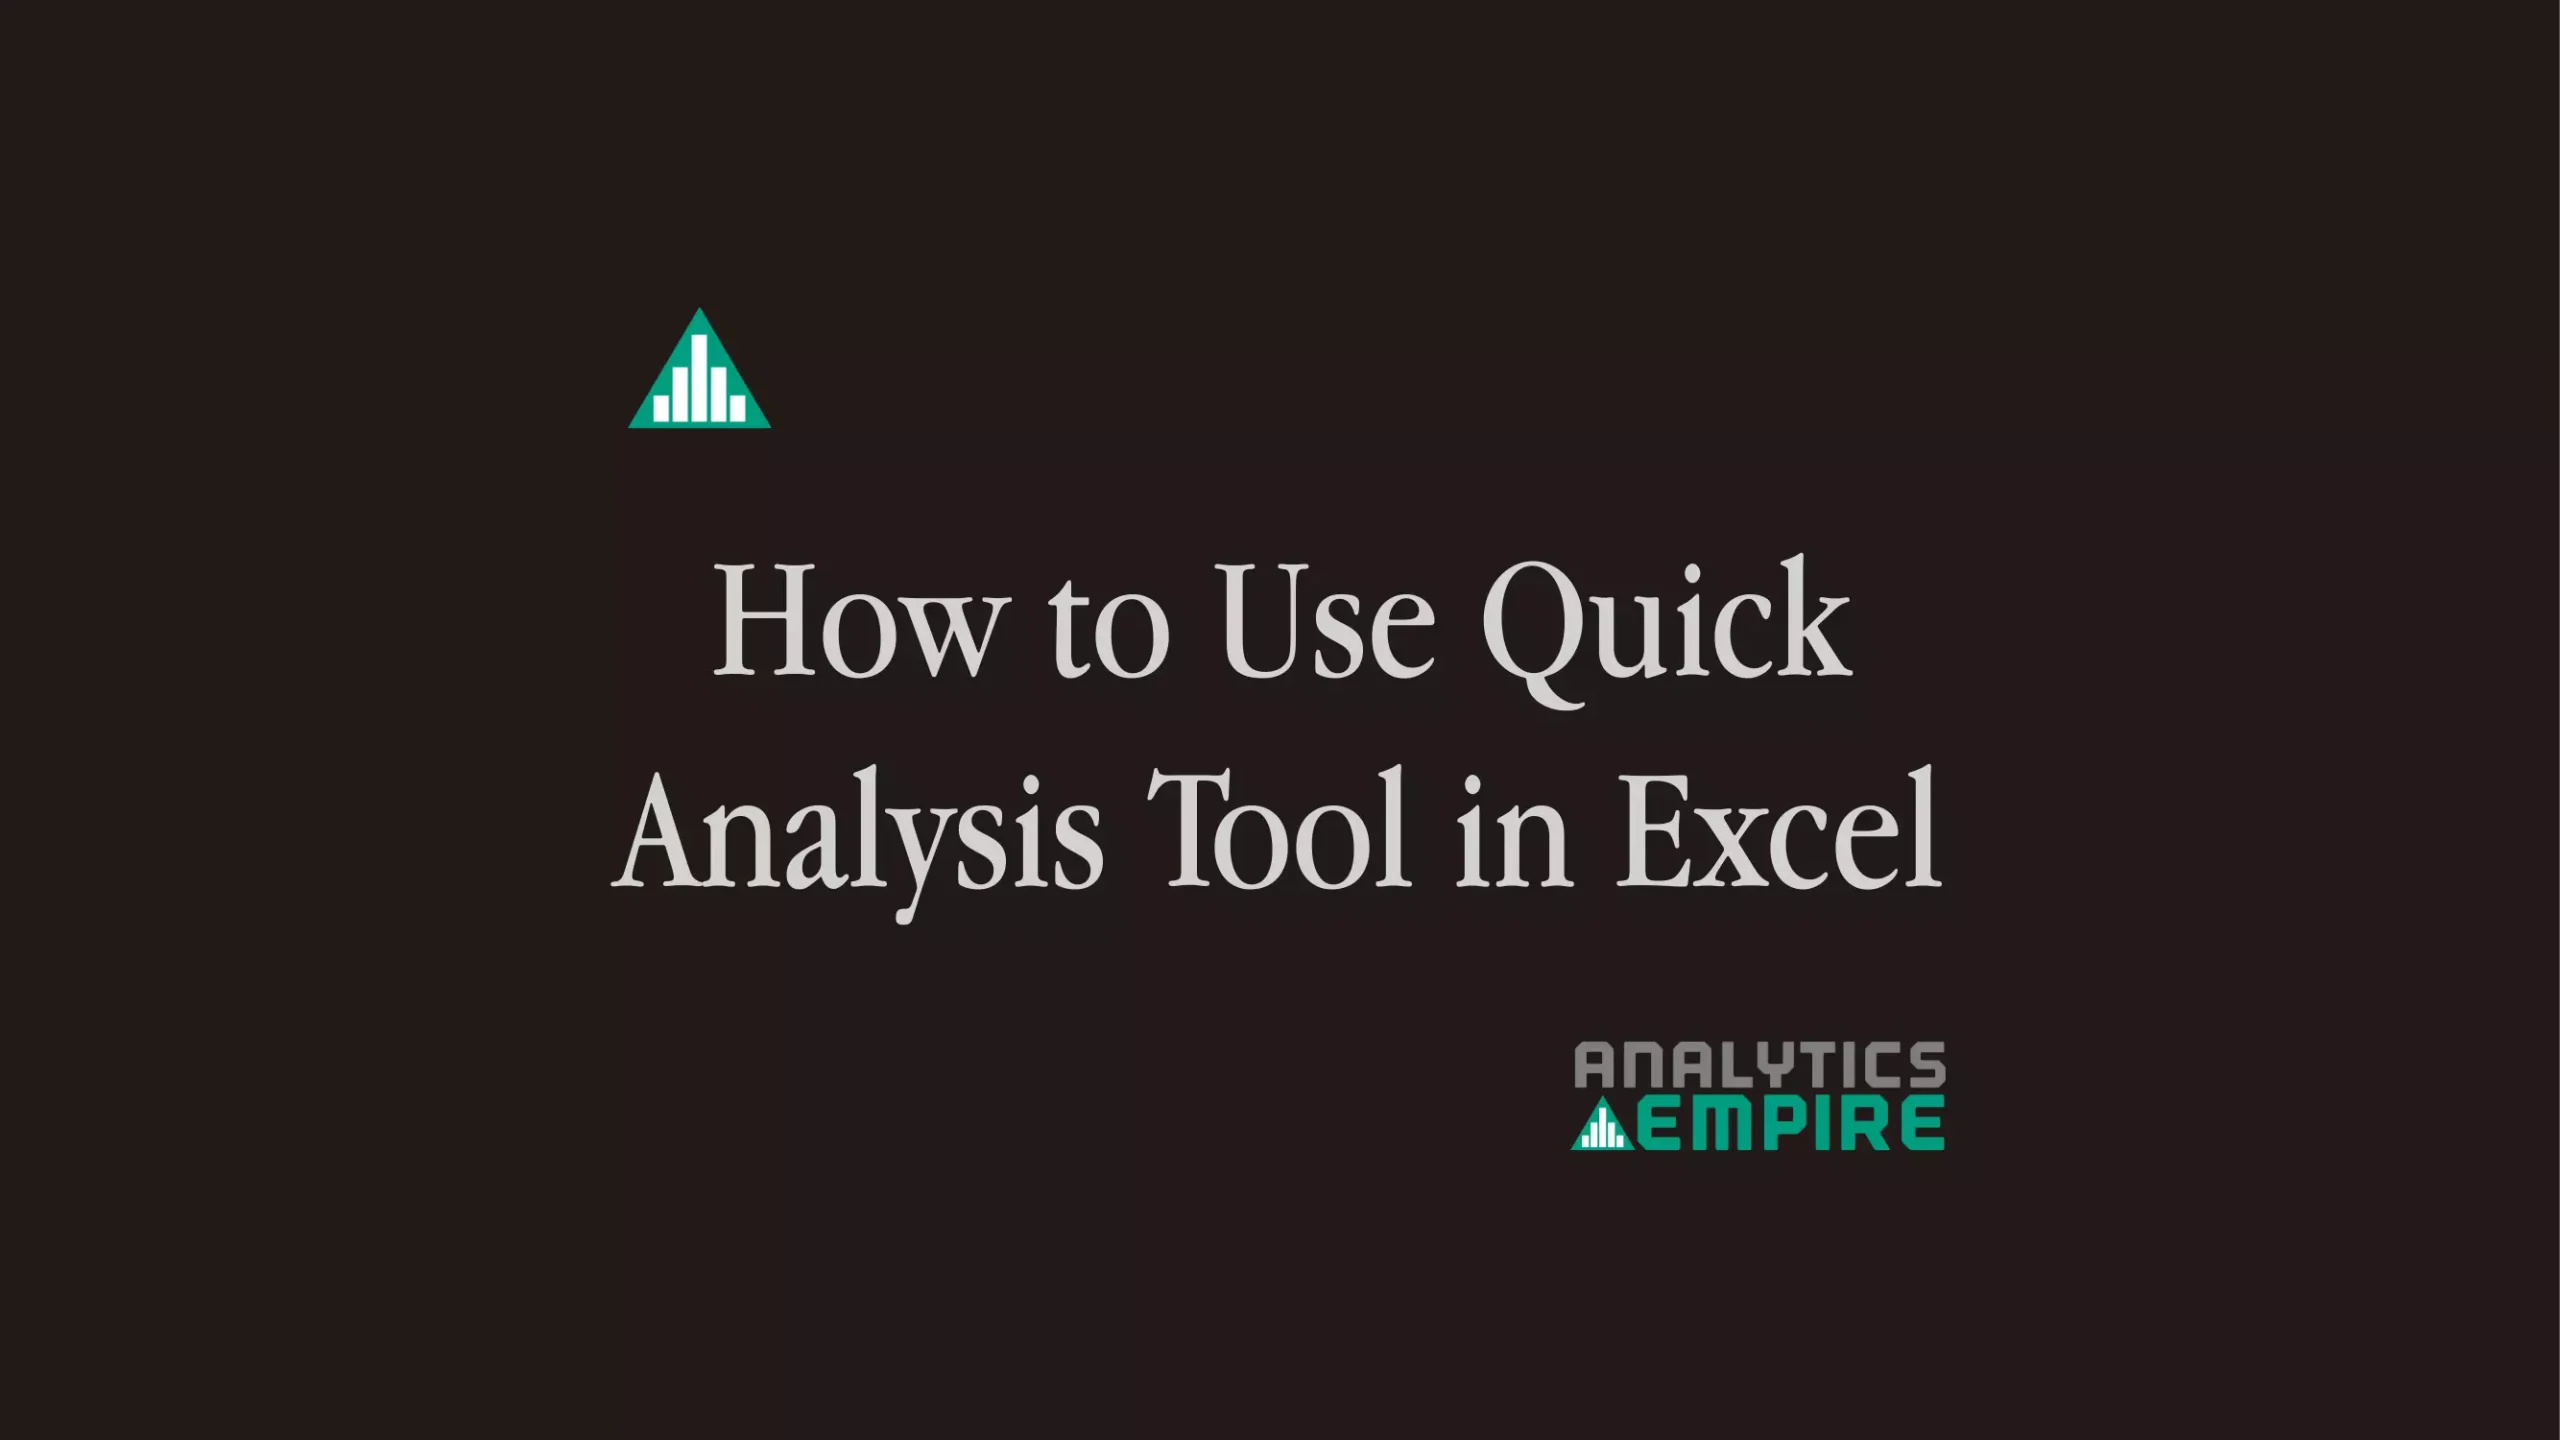 How to use quick analysis tool in Excel